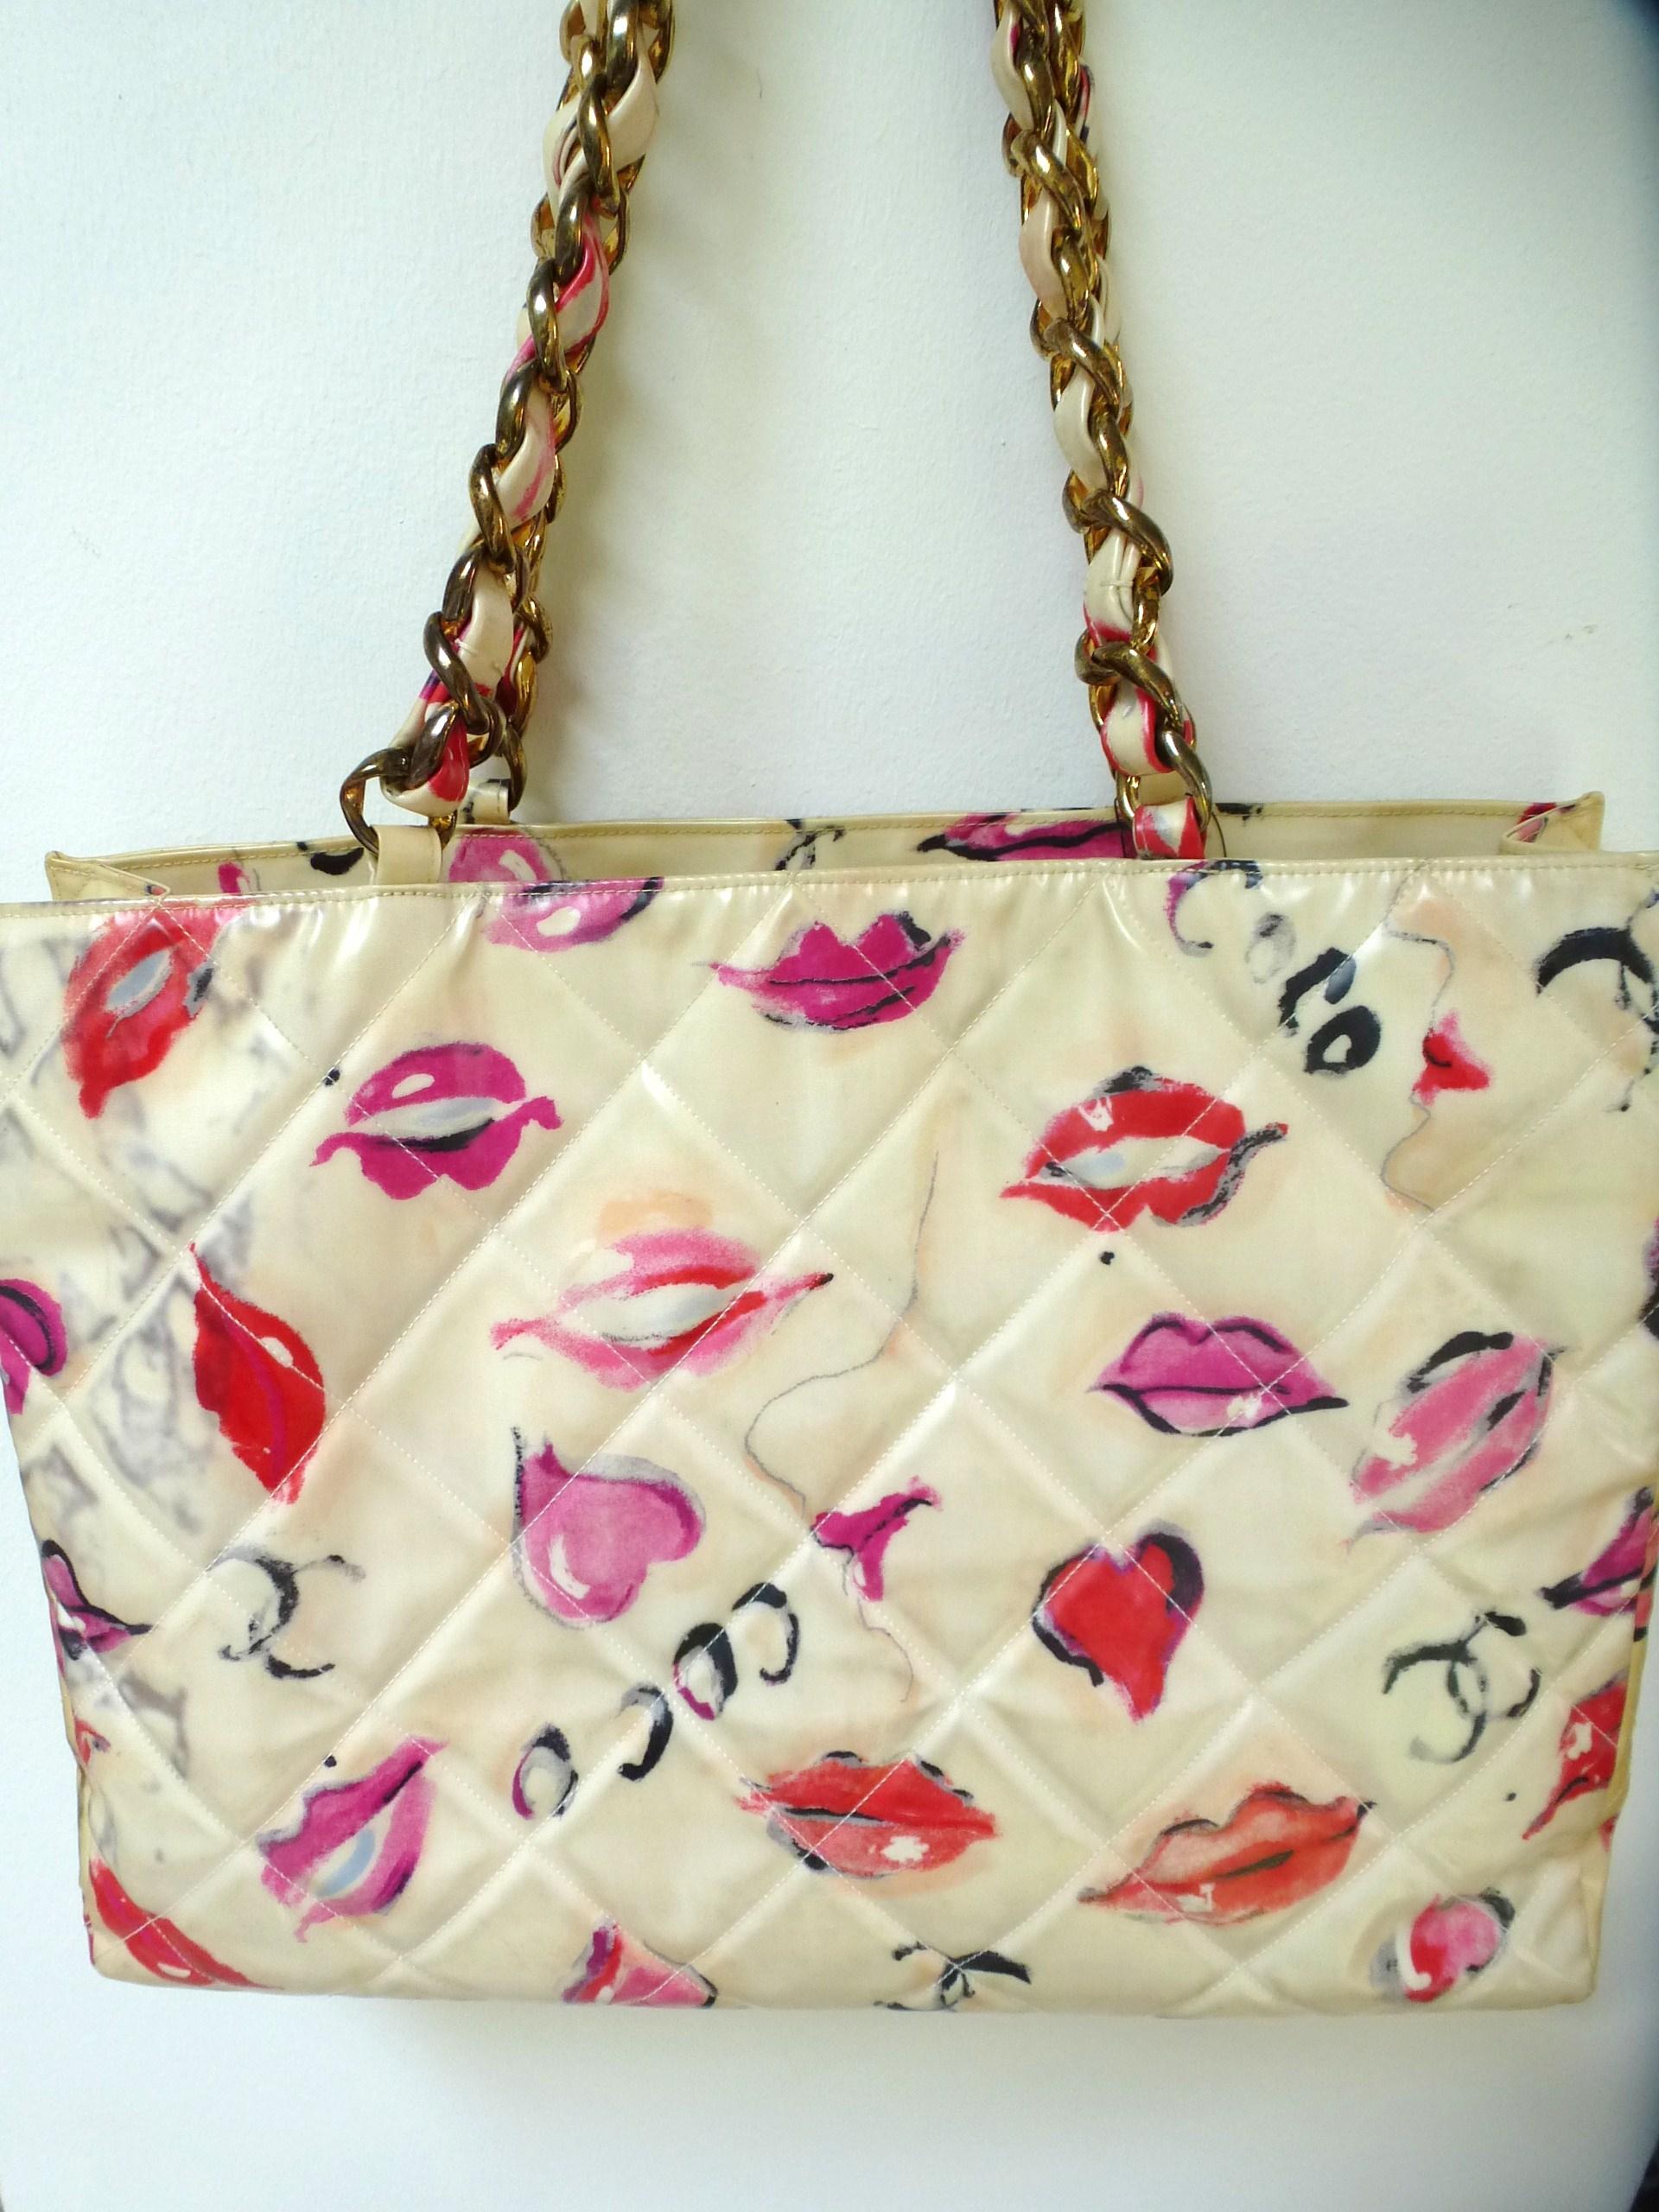 Chanel Jumbo Nylon Shopper Tot bag with lips, hearts Coco and CC's graffiti all over the bag. The front is quilted with large CC. The inside of the bag is filled with a light-colored rep, has 2 compartments on the side, one with a zip. ID card with